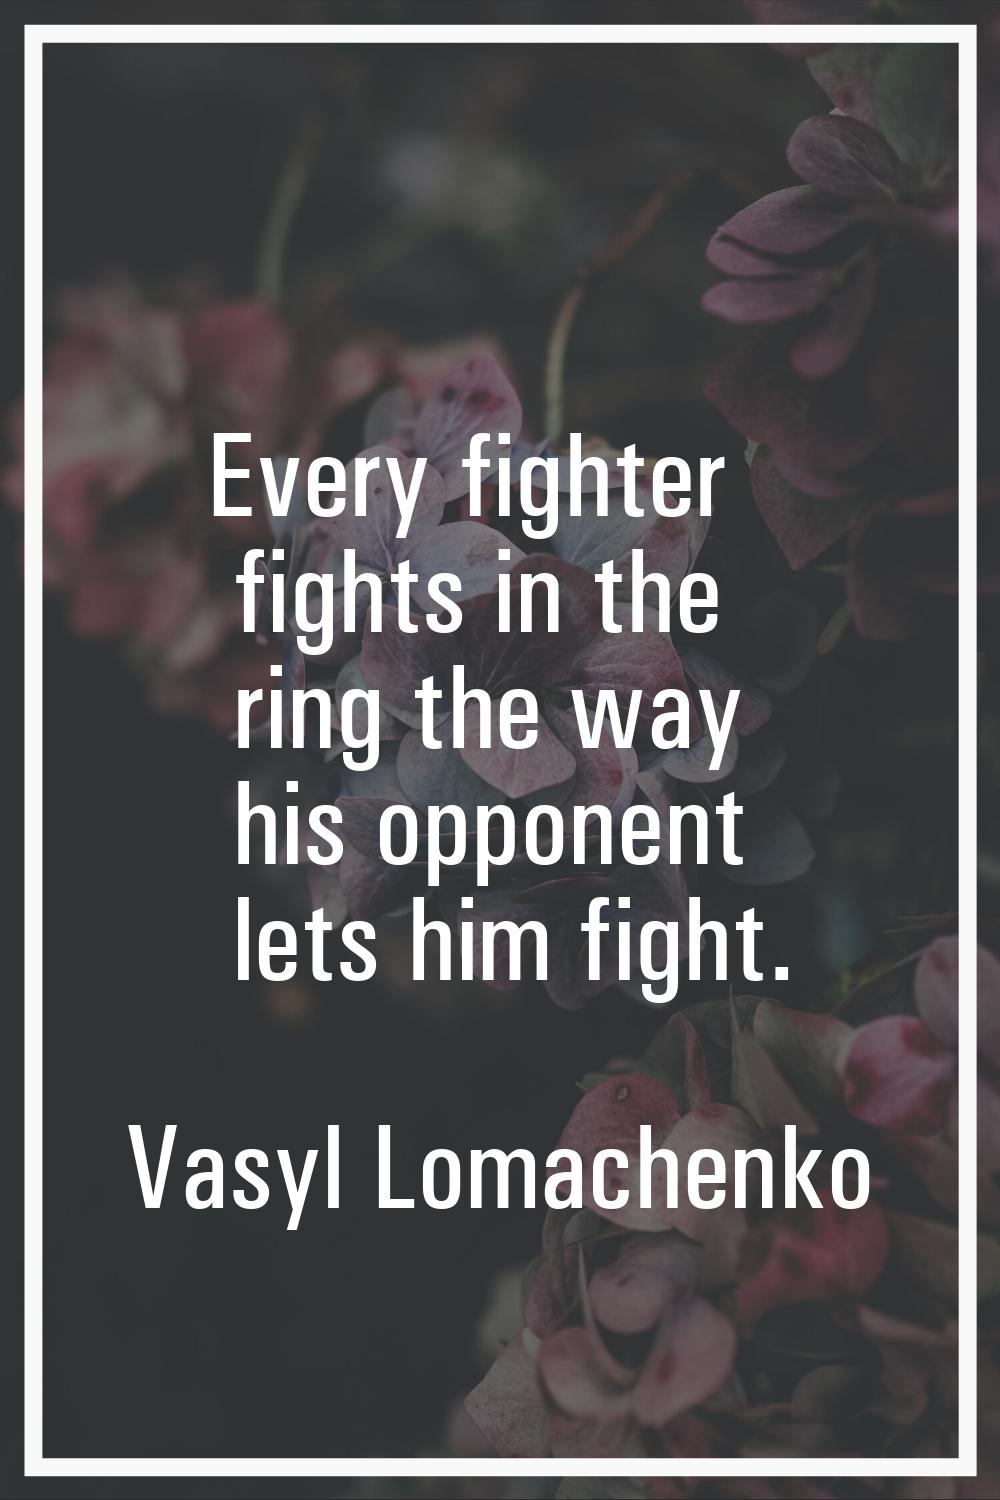 Every fighter fights in the ring the way his opponent lets him fight.